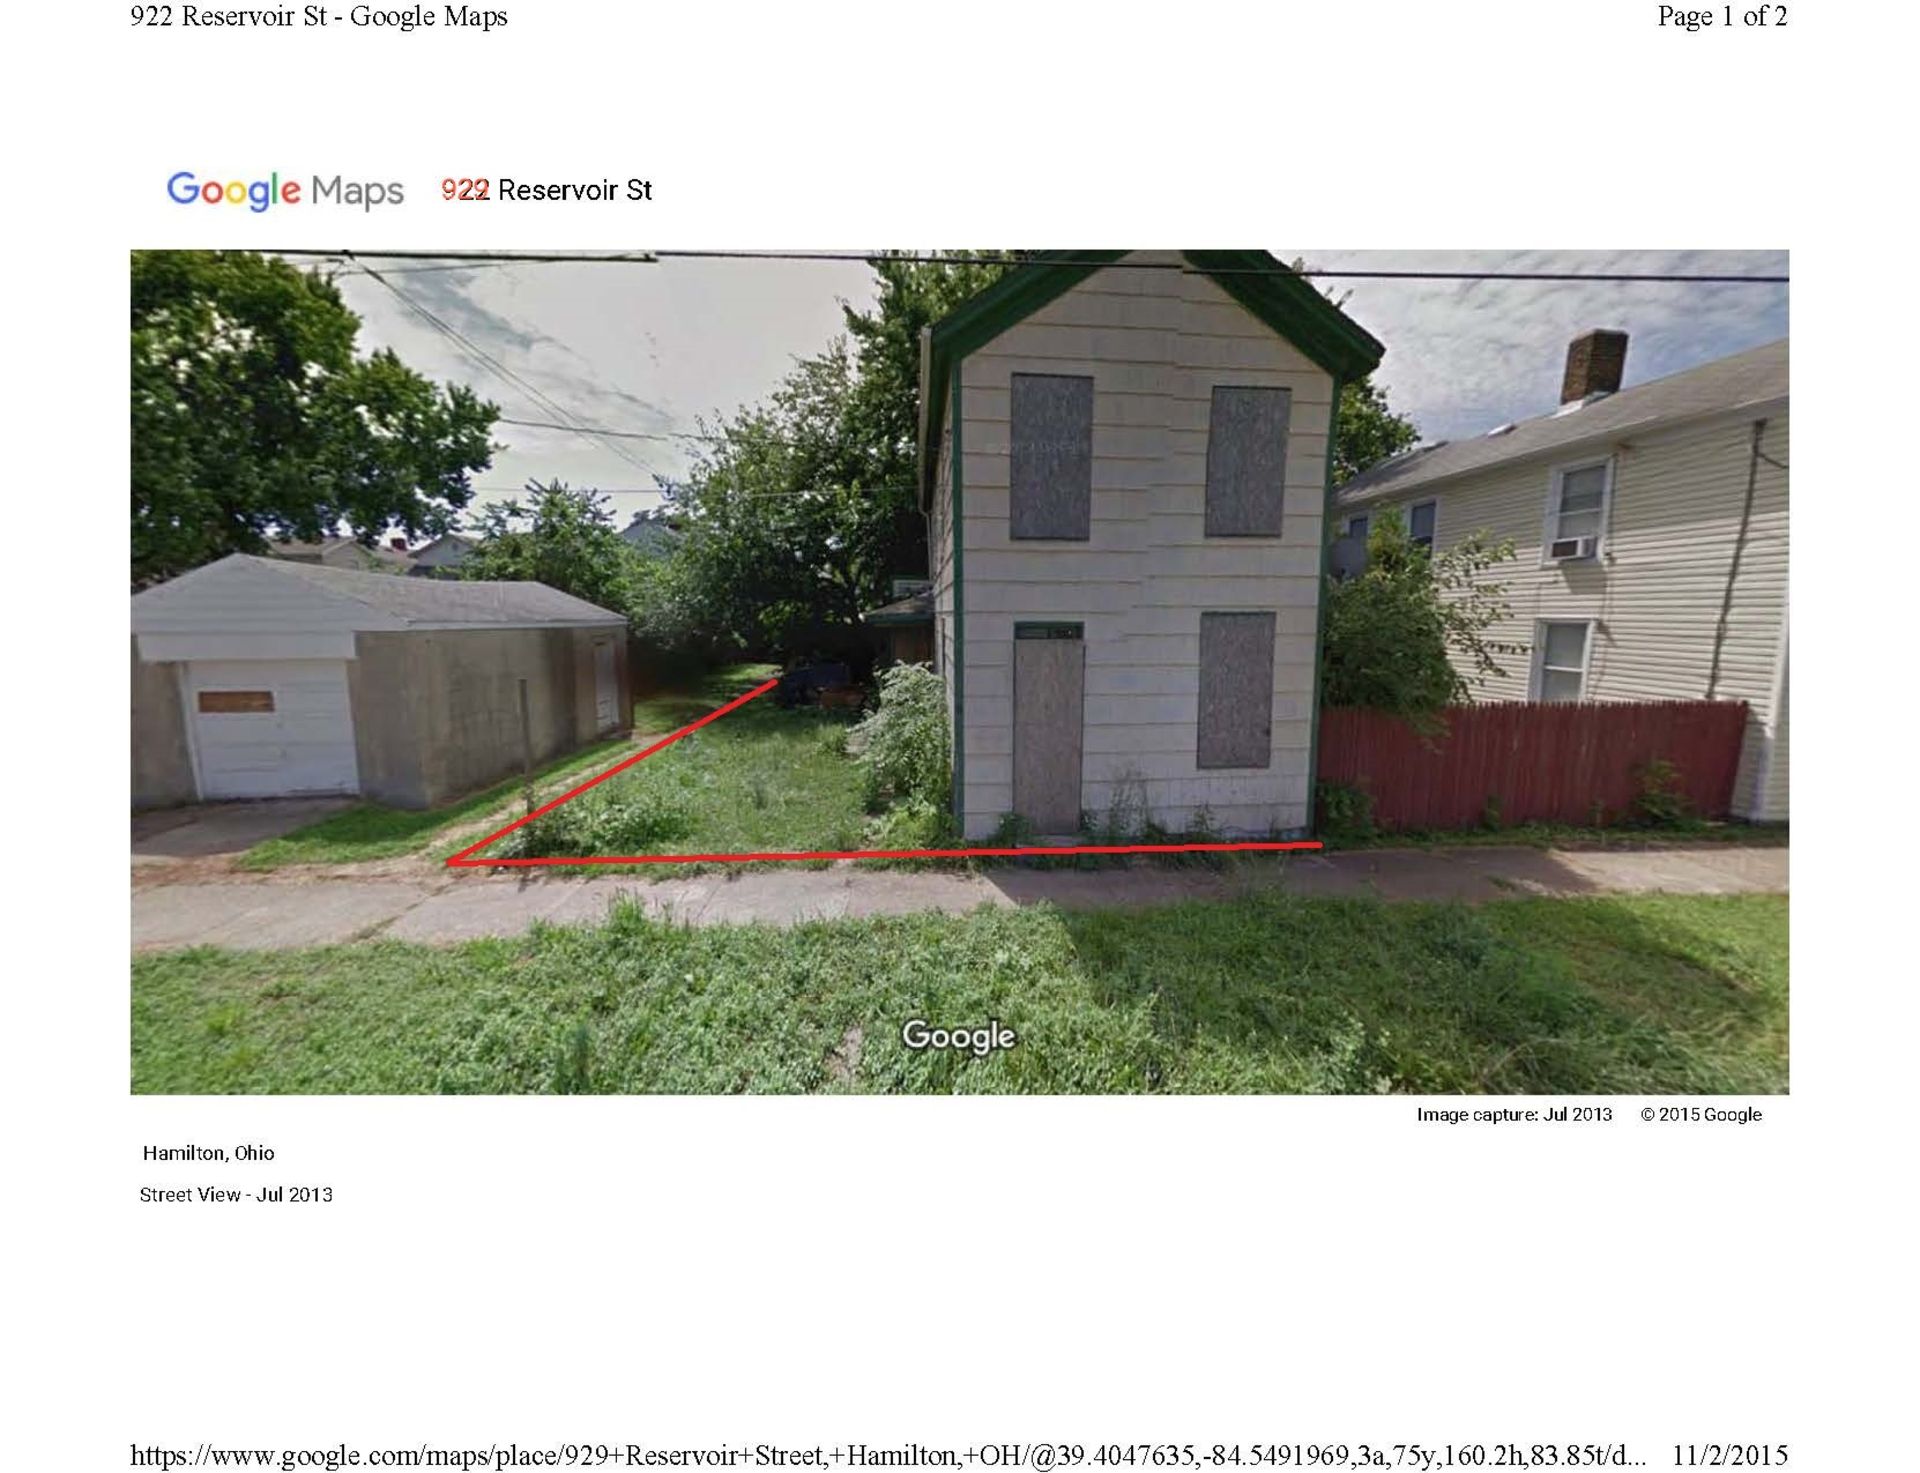 2 ADJOINING parcels of land in Hamilton, OHIO, USA - Image 4 of 6